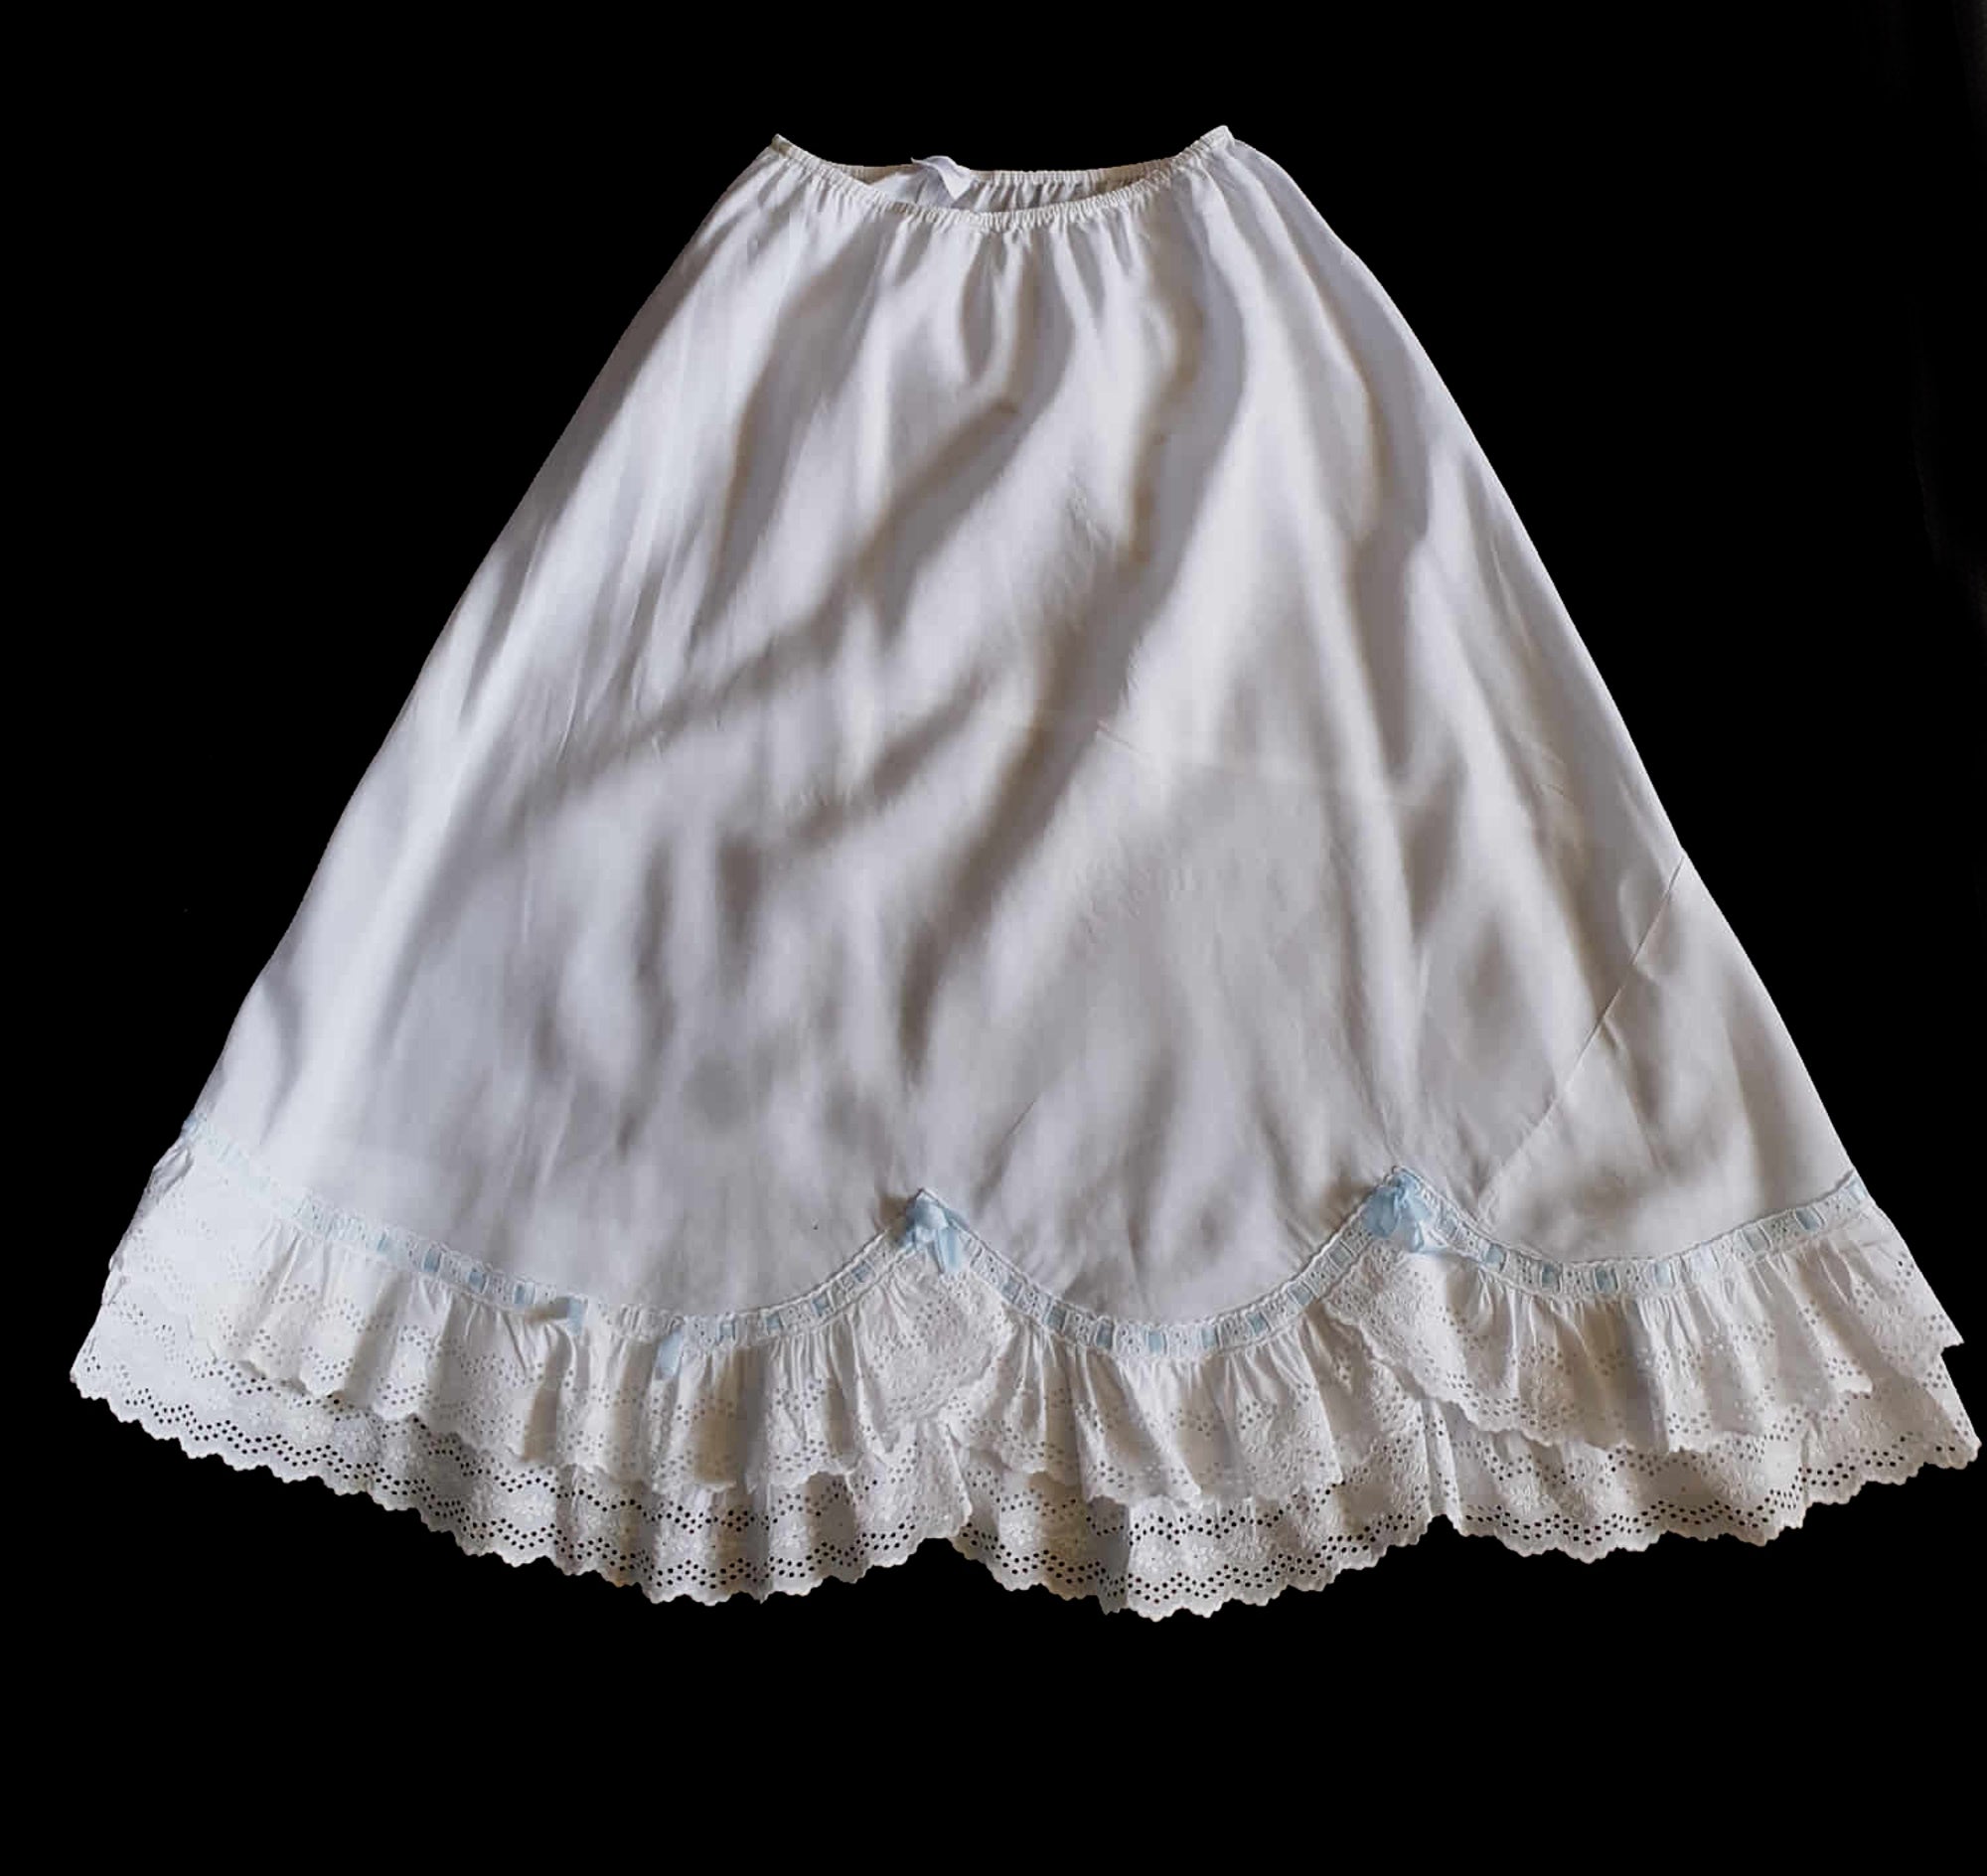 1950s vintage white cotton half slip with with broderie anglaise or eyelet rim and blue ribbon Small